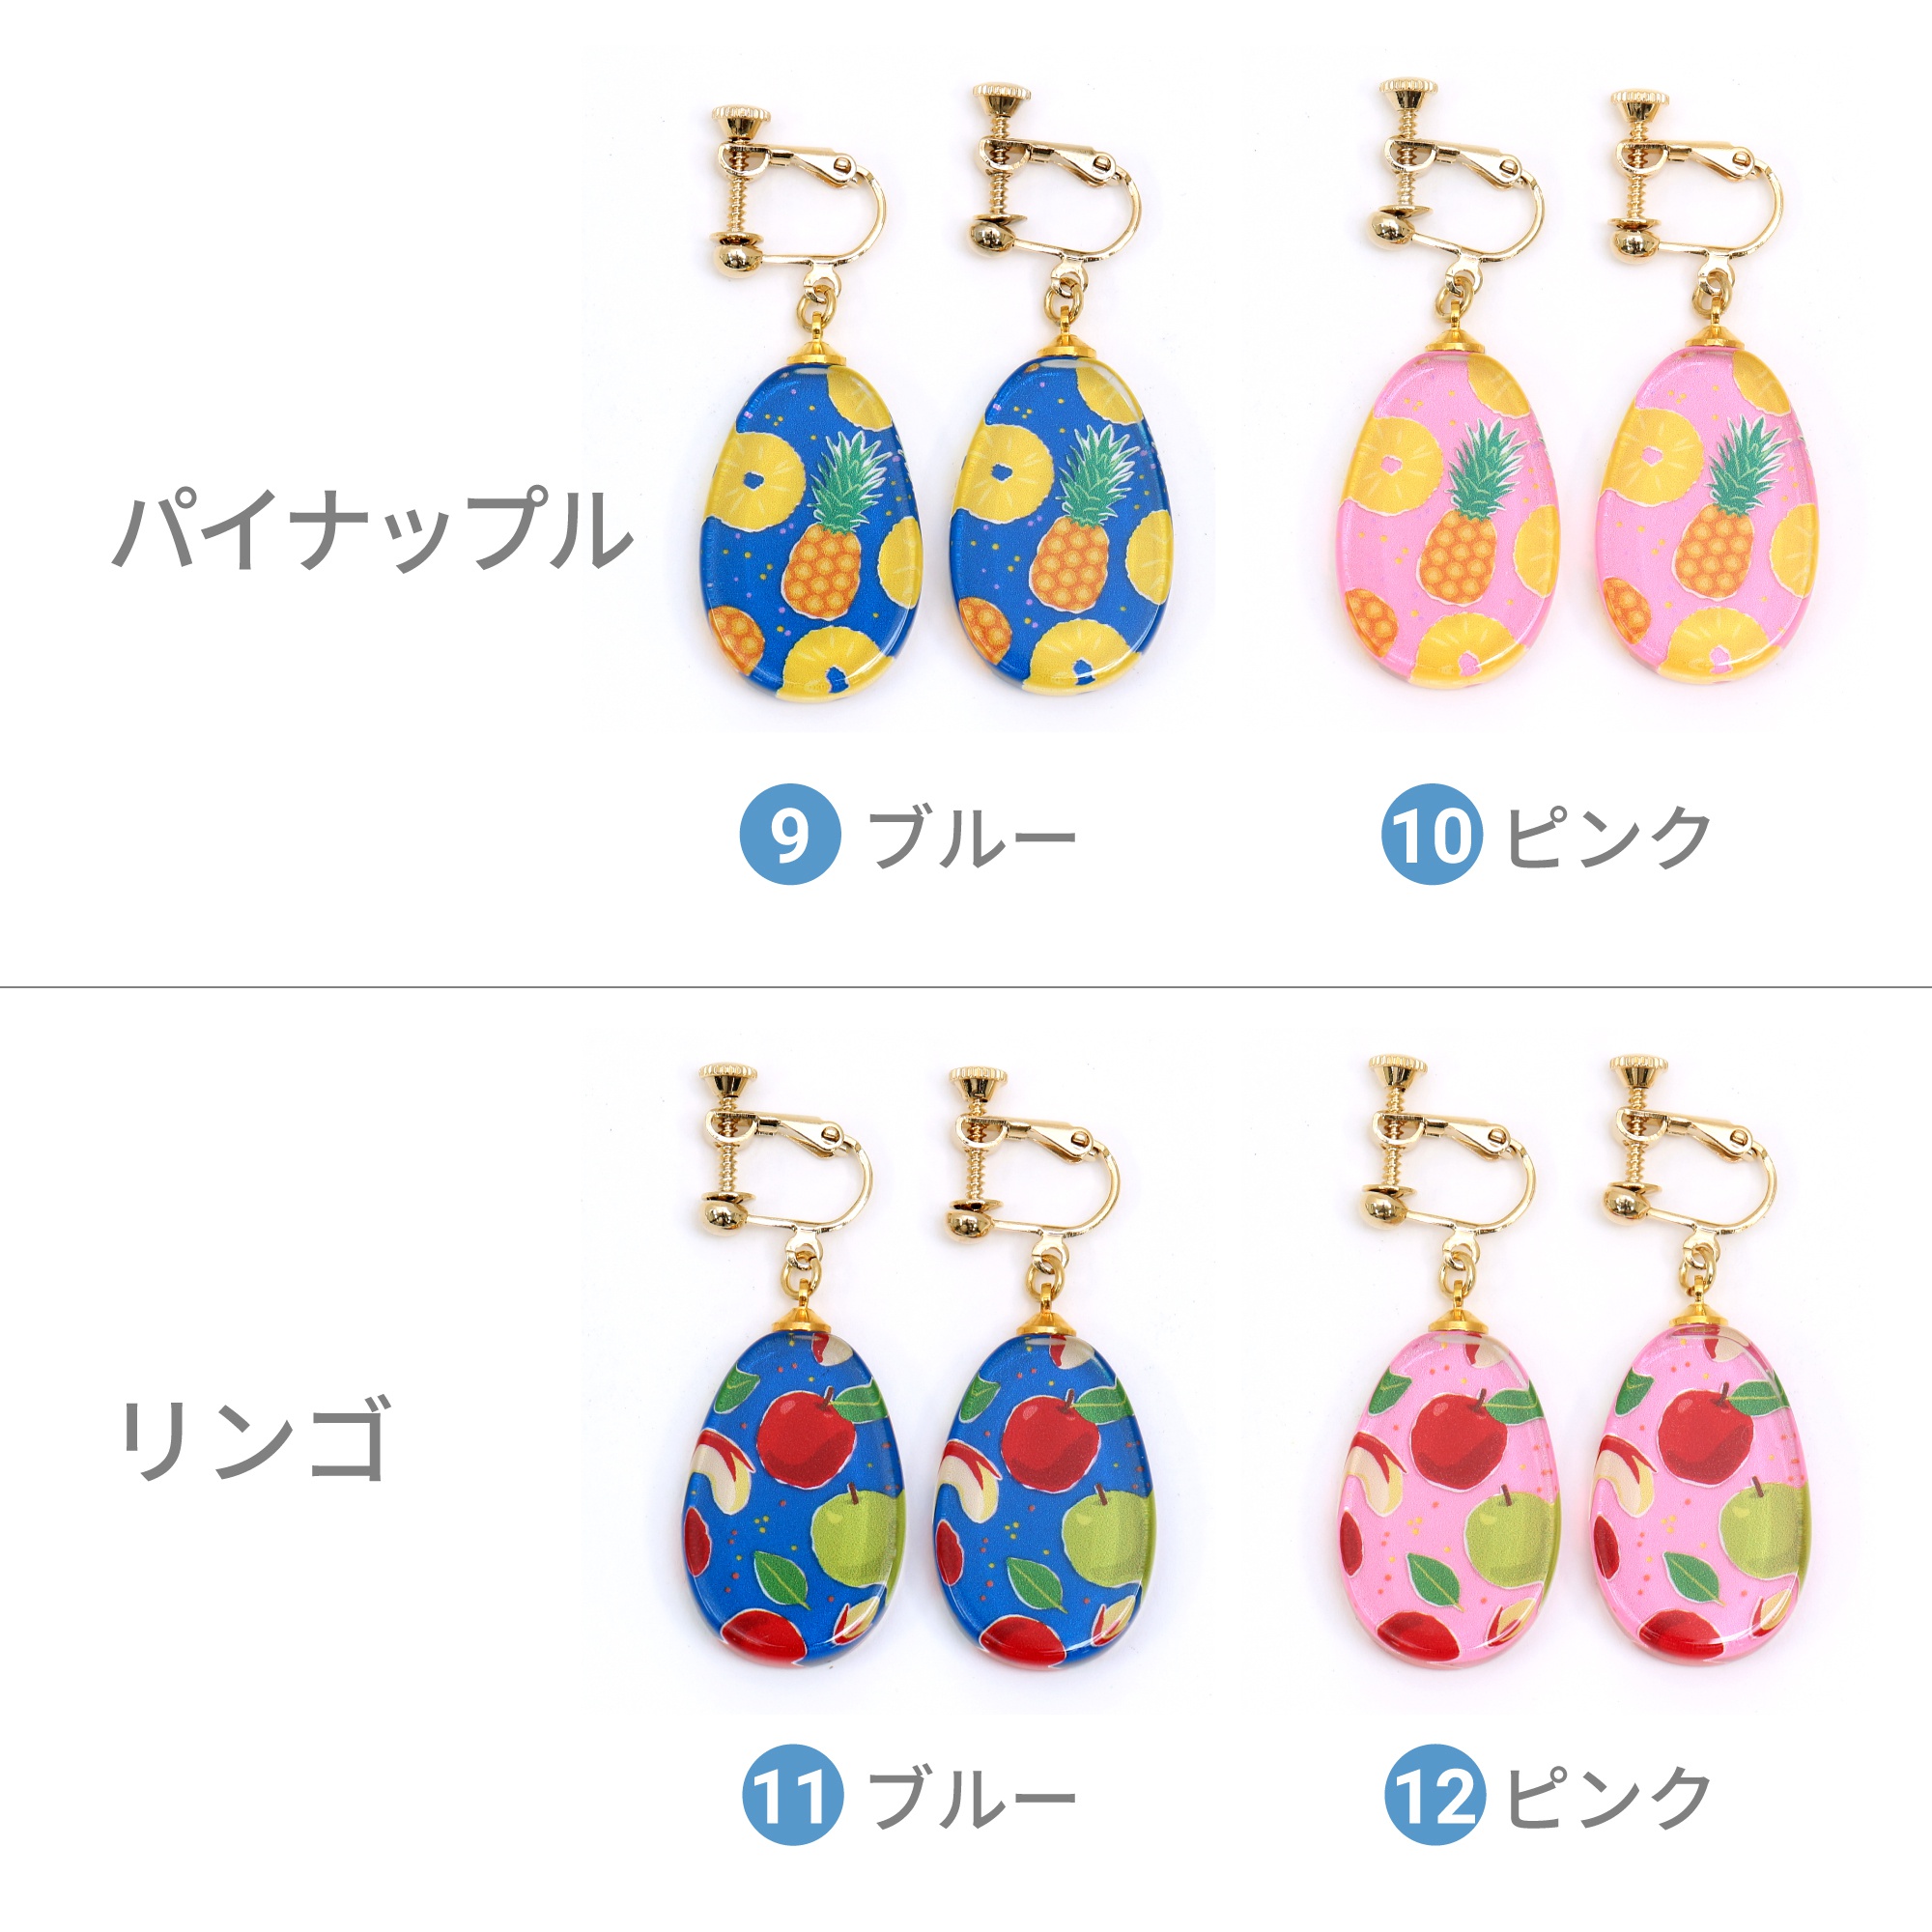 Glass accessories Earring FRUITS APPLE BLUE square shape